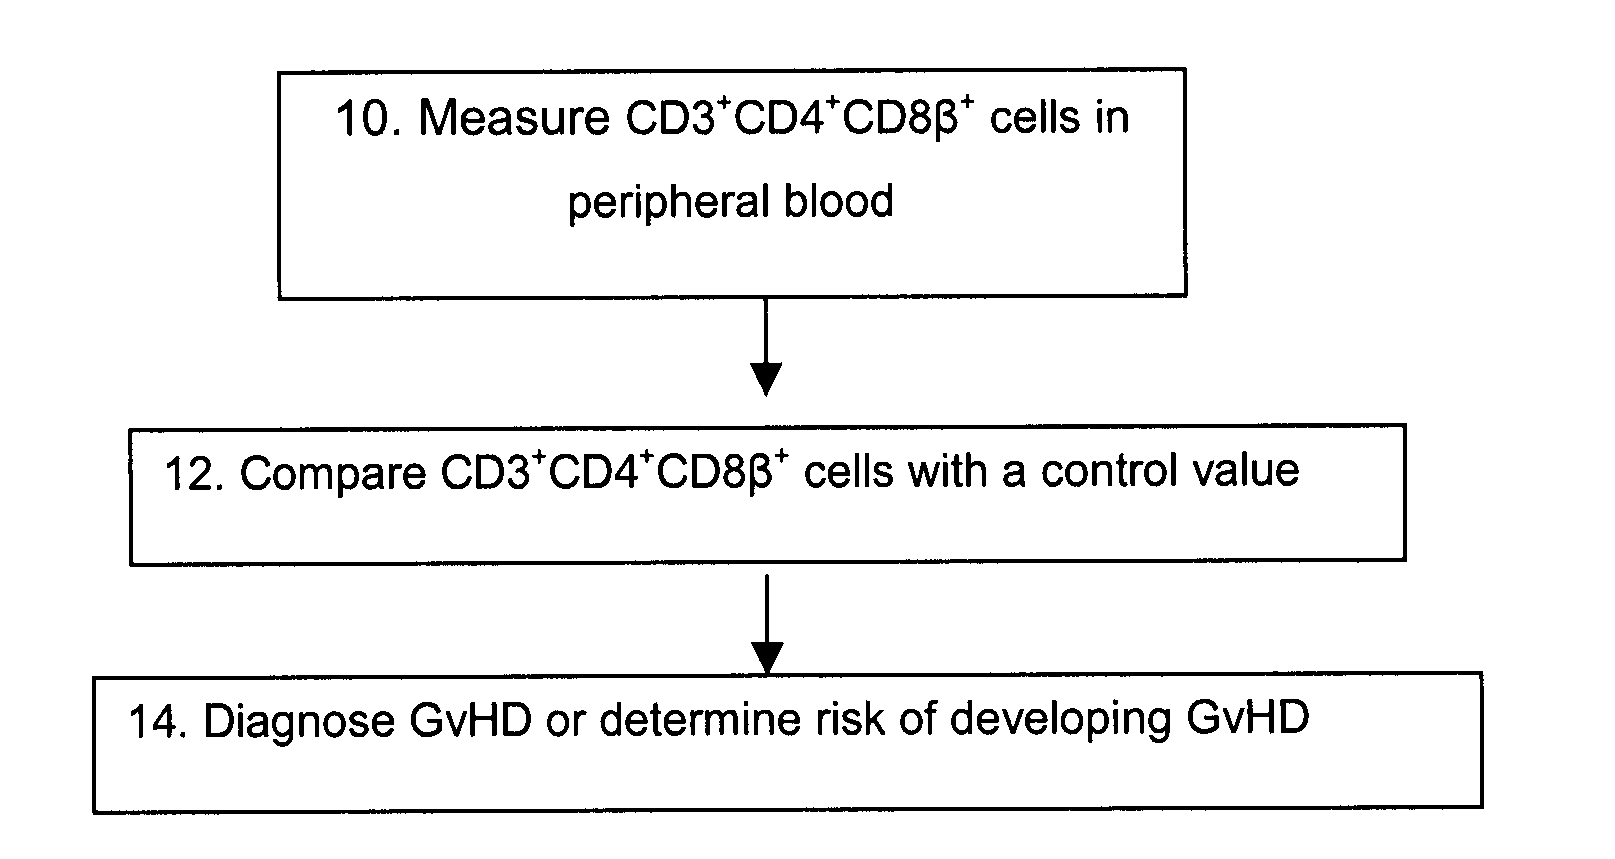 Methods for the Diagnosis and Prognosis of Graft Versus Host Disease By Measurement of Peripheral Cd3+Cd4+Cd8Beta+ Cells